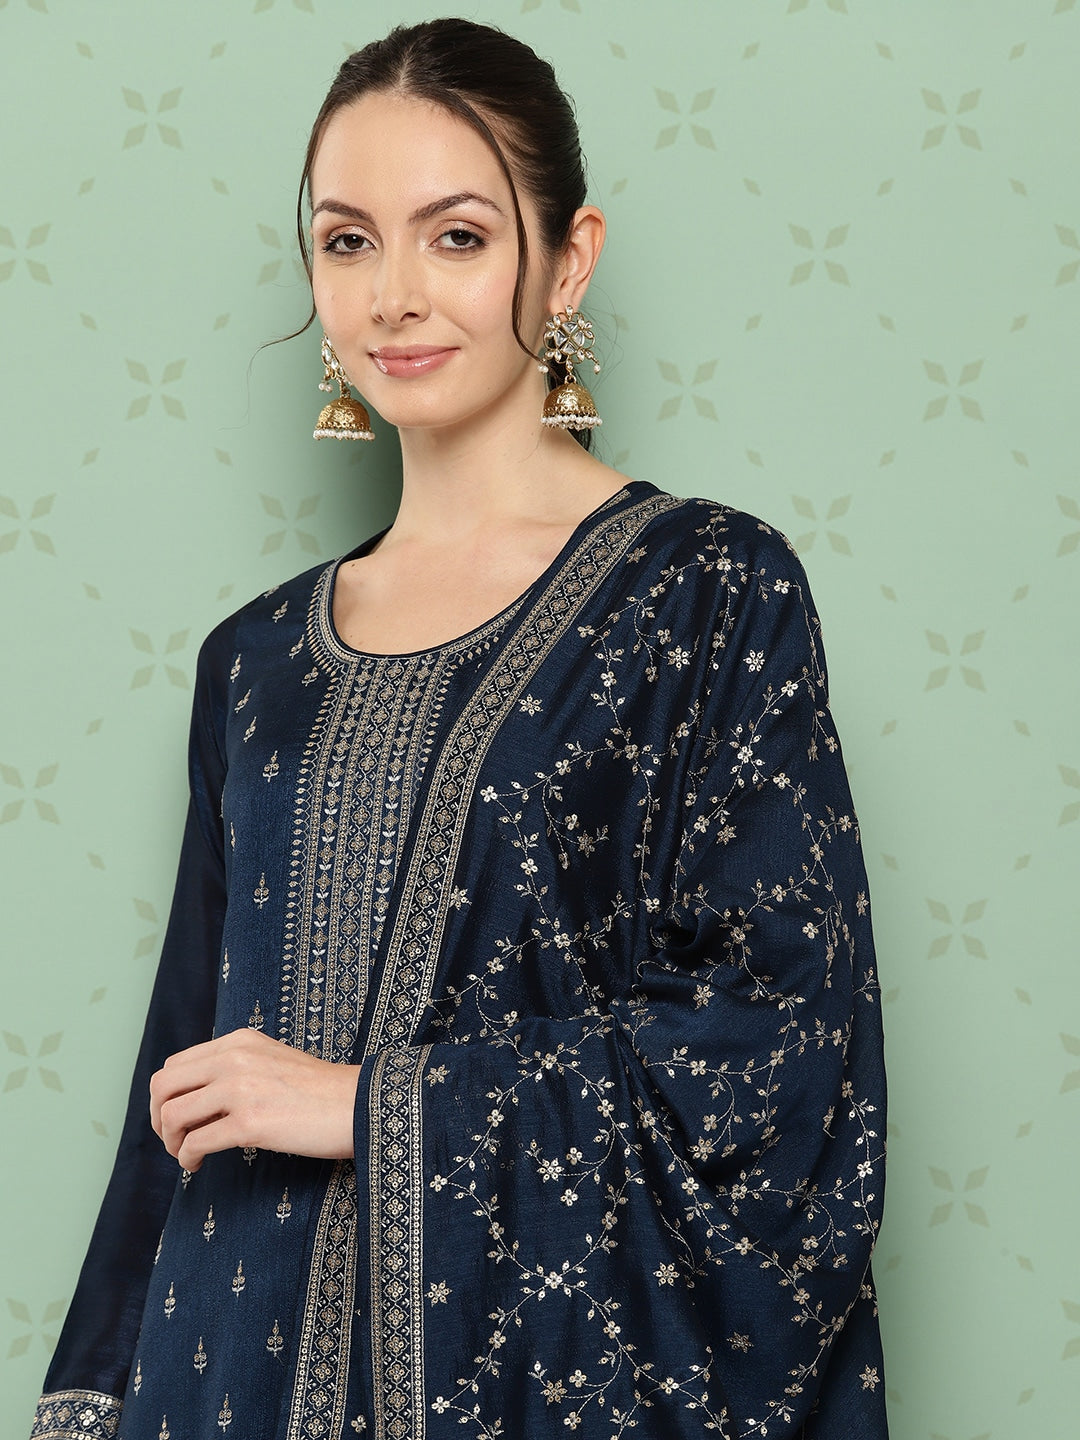 Up to 60% Off on Ethnic Wear for Women on End of Season Sale | Libas